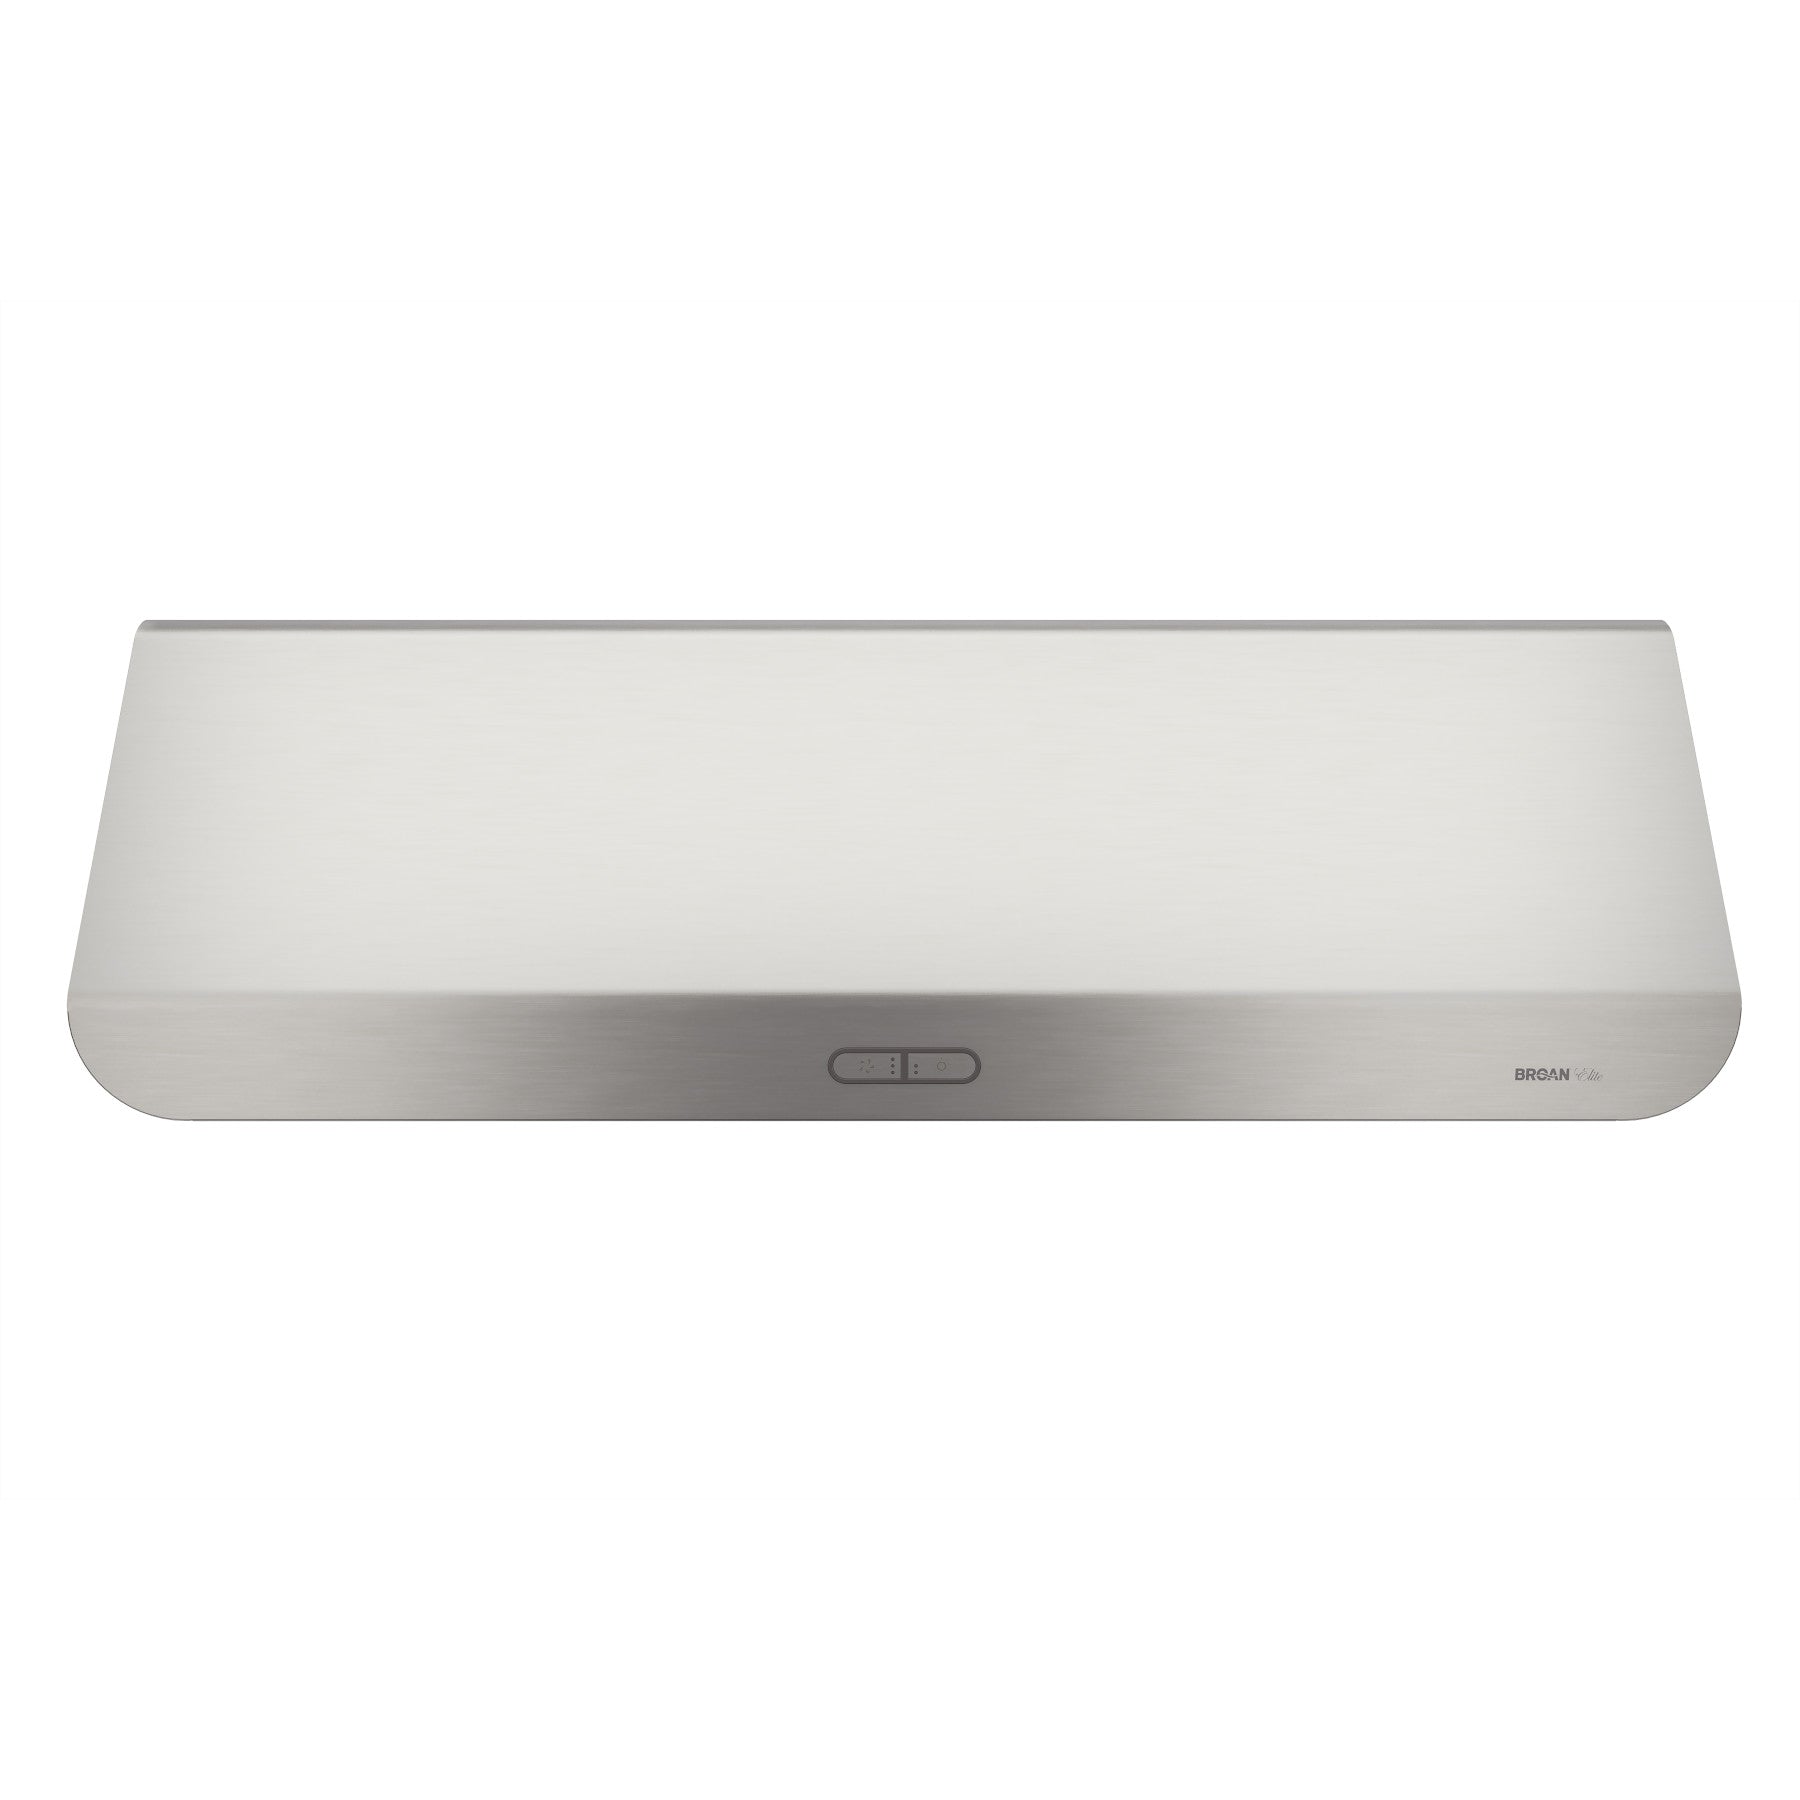 Broan - 36 Inch 650 CFM Under Cabinet Range Vent in Stainless - EPLEC136SS